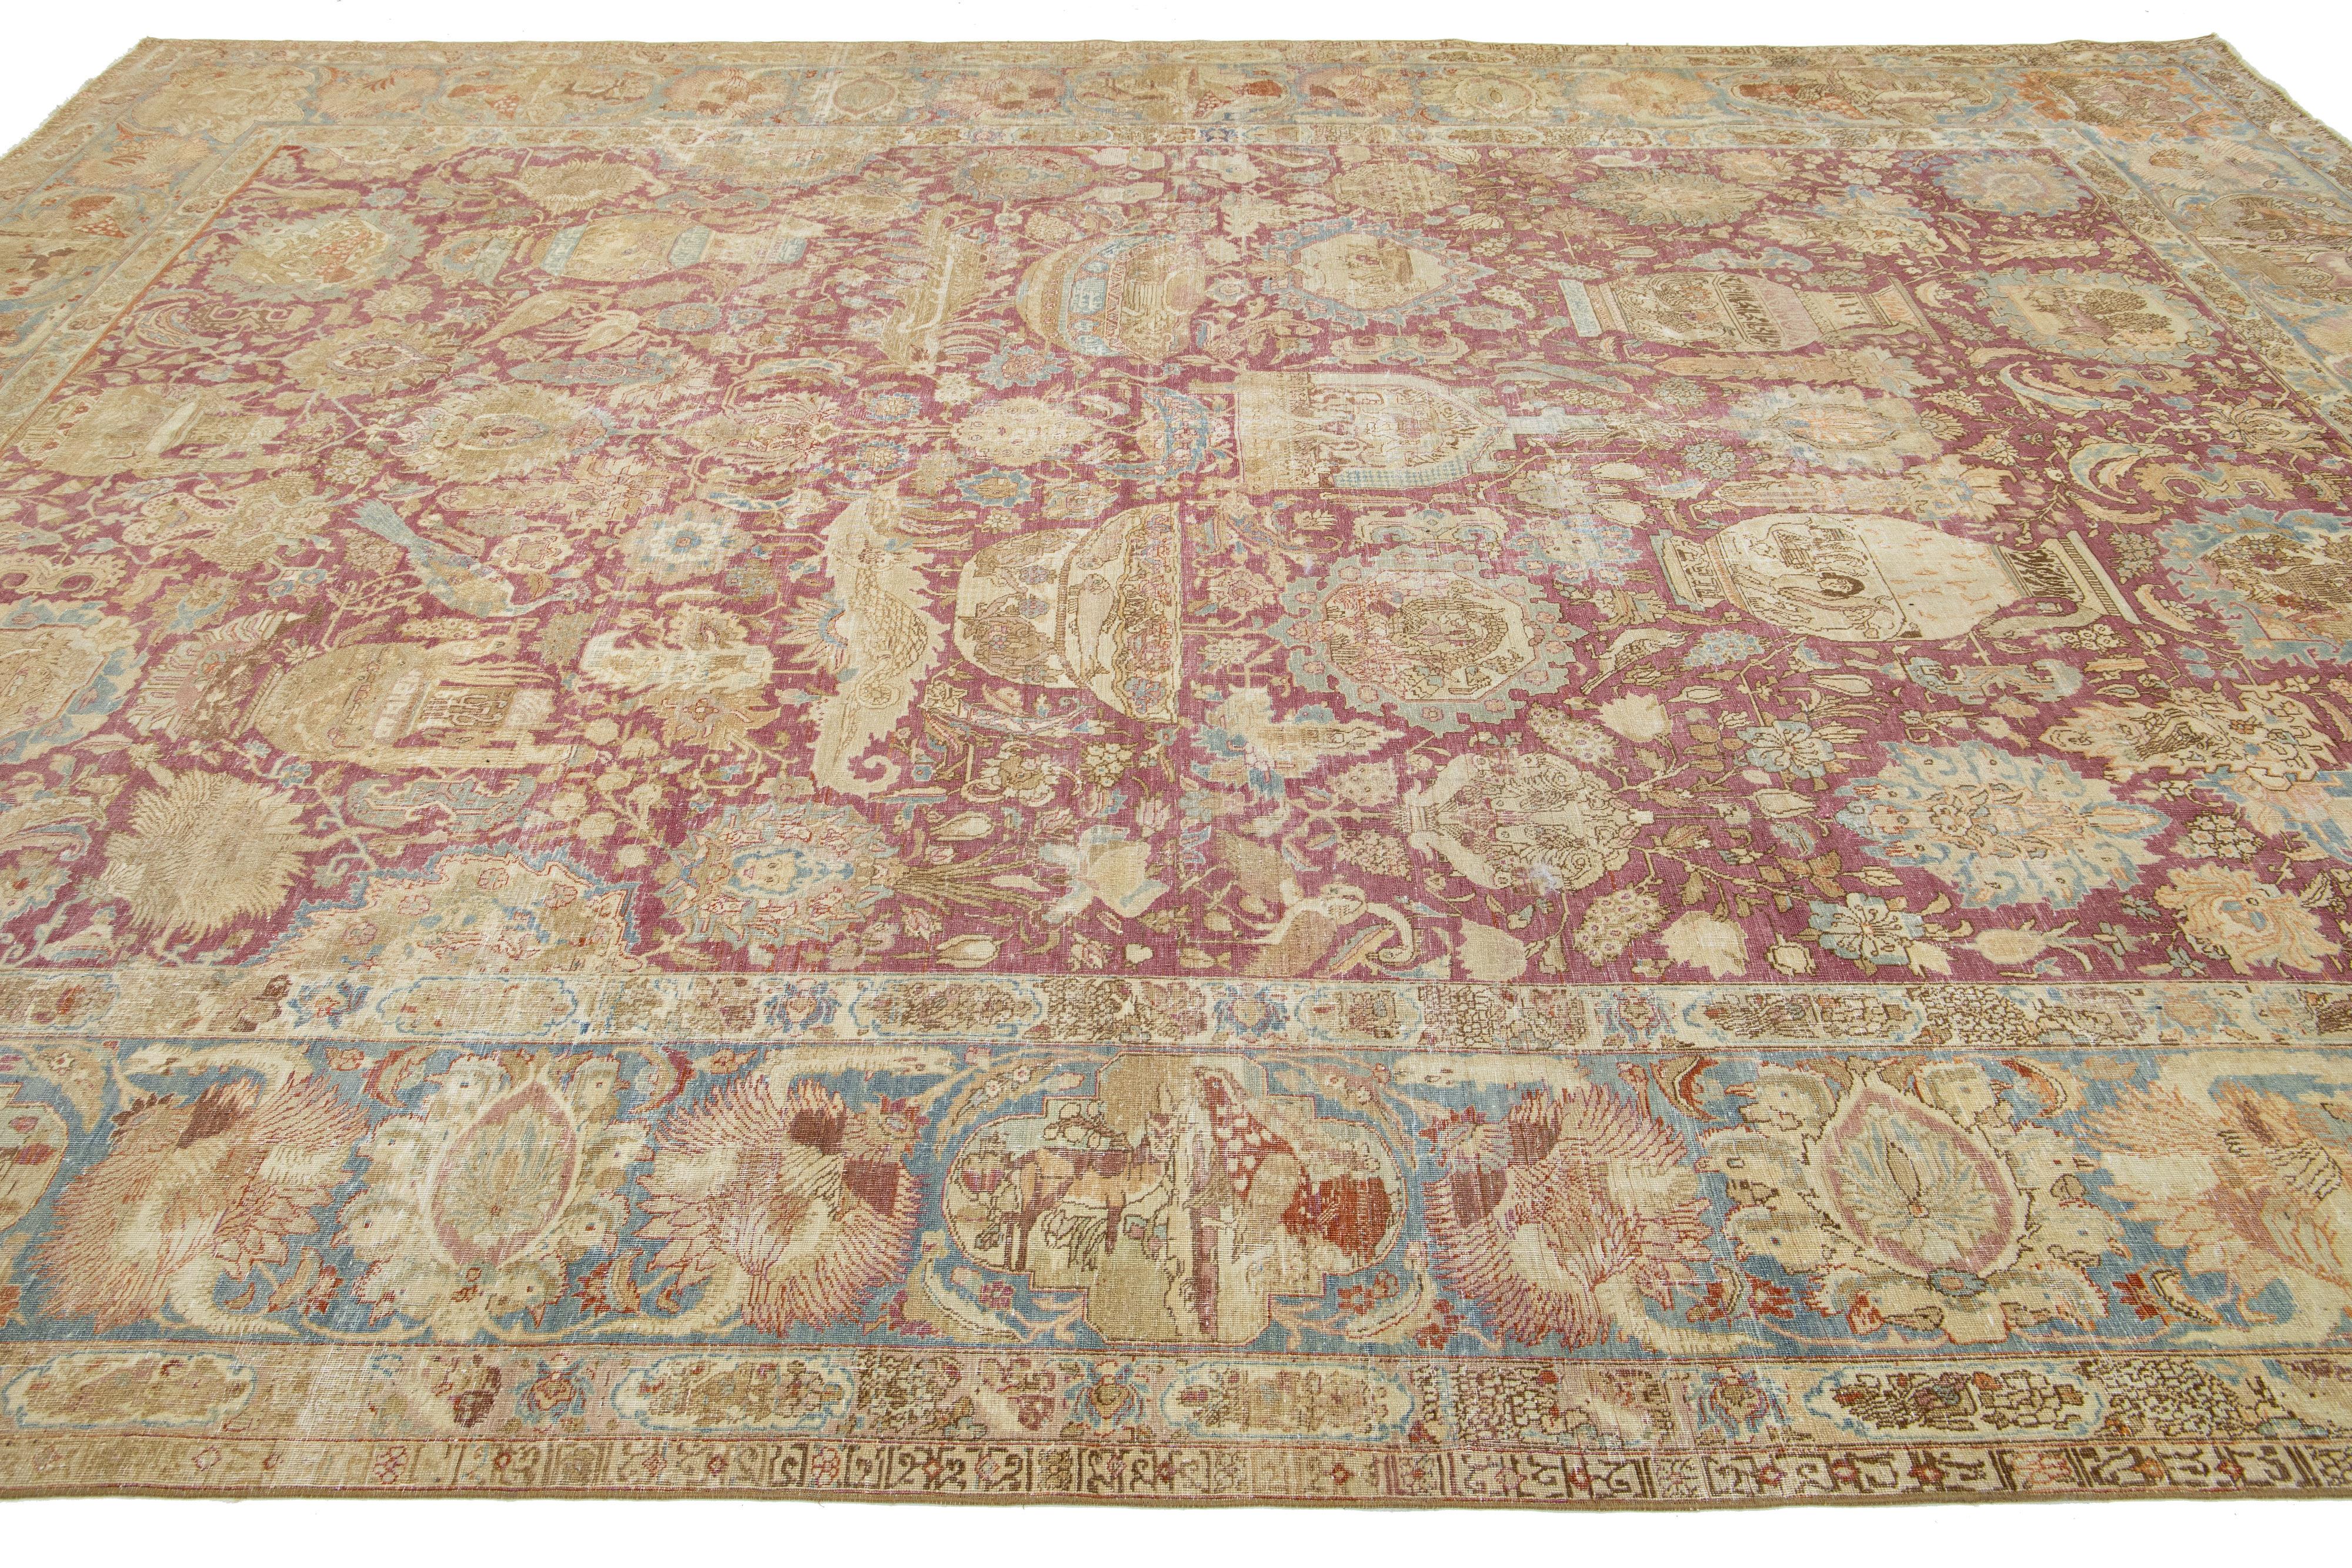 20th Century Antique Persian Tabriz Wool Rug with Red Allover Design from the 1900s For Sale